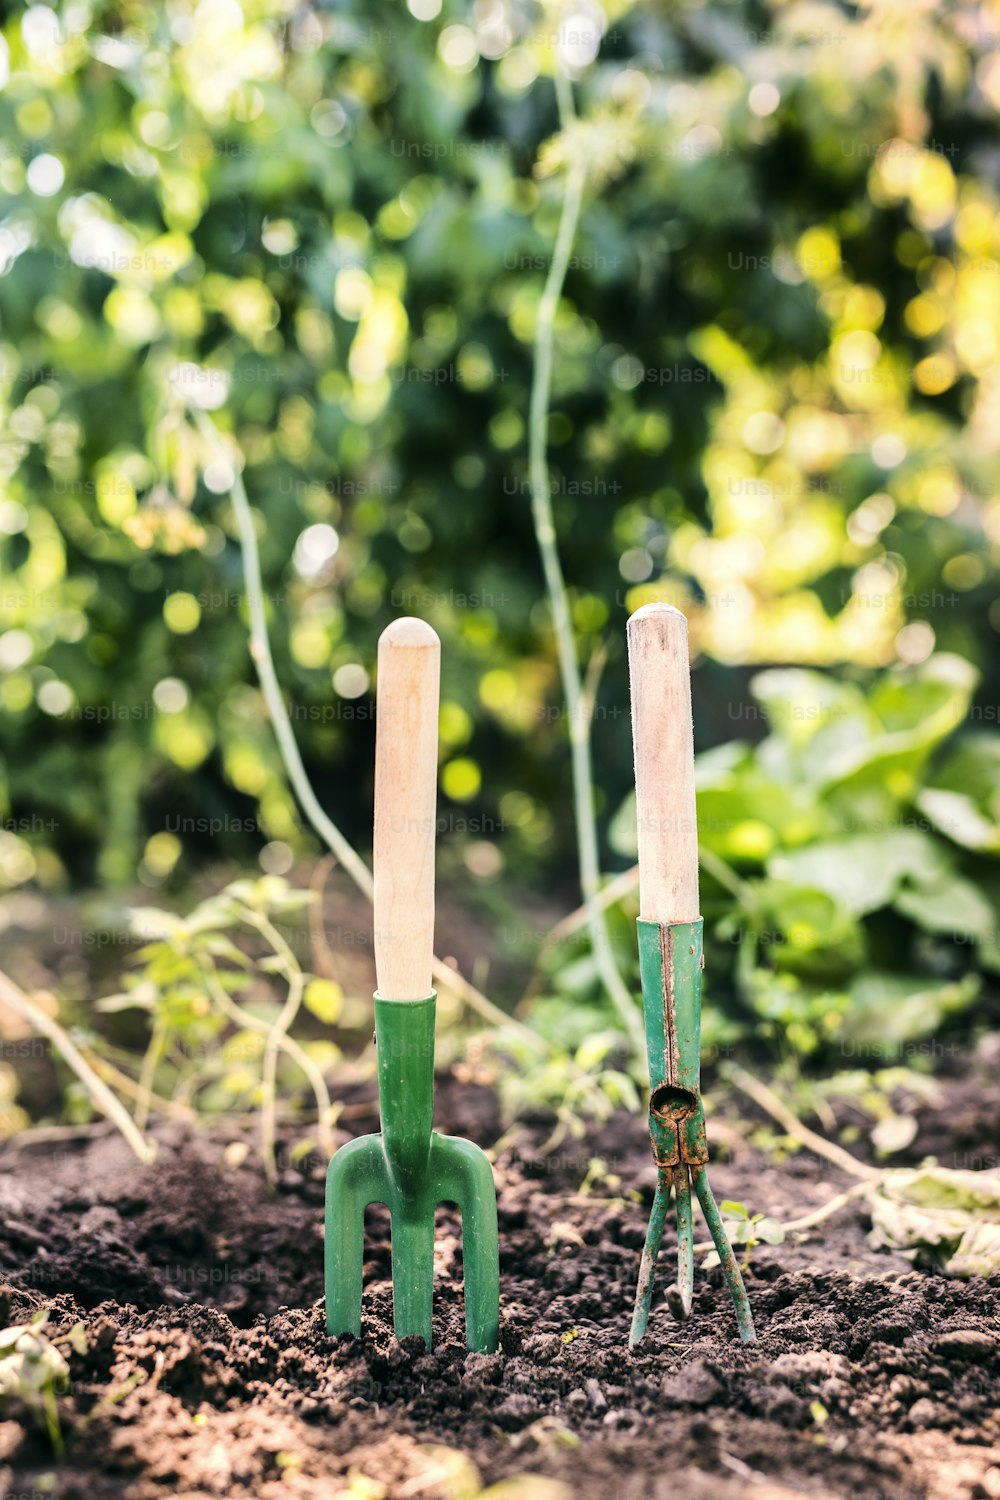 Close up of garden tools in the garden. Hand fork and a cultivator stuck in the ground. Close up.